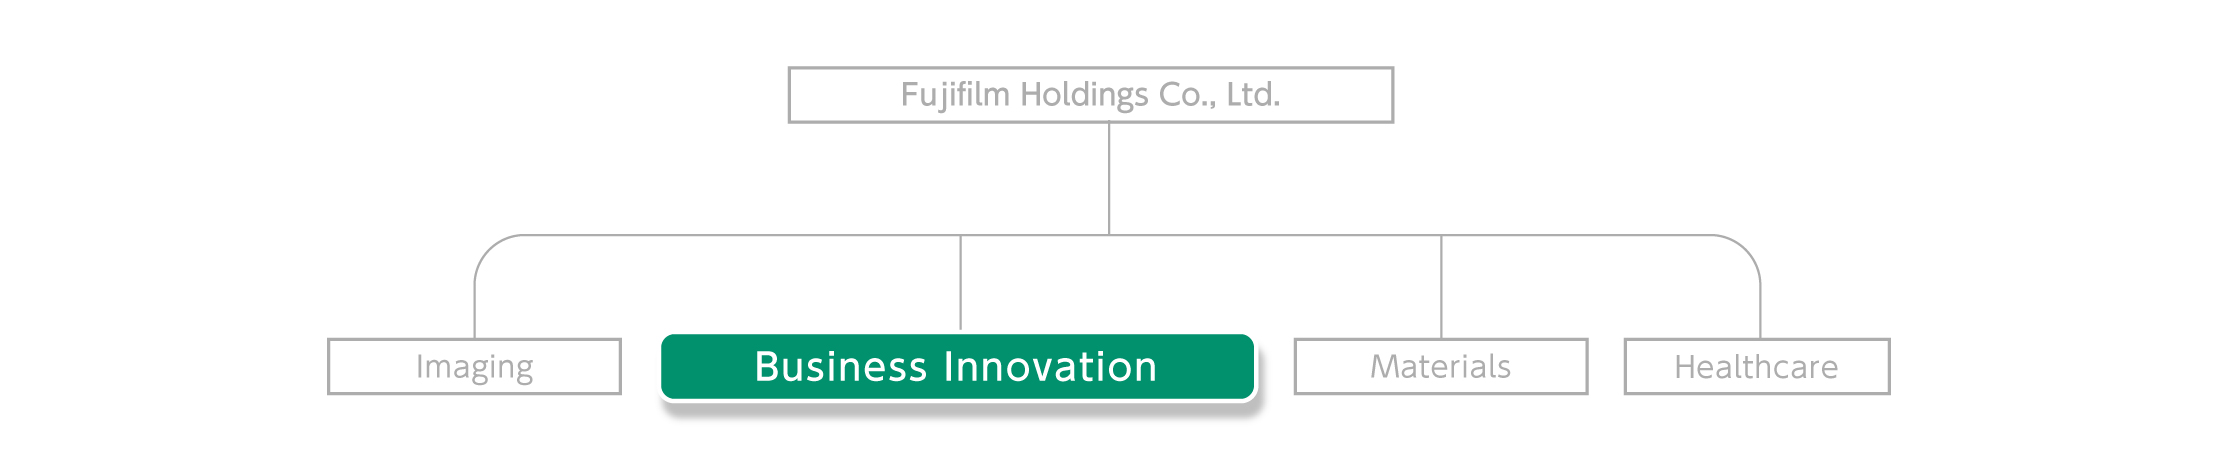 Fujifilm Holdings has four businesses, and we contribute to our customers’ growth through the Business Innovation.